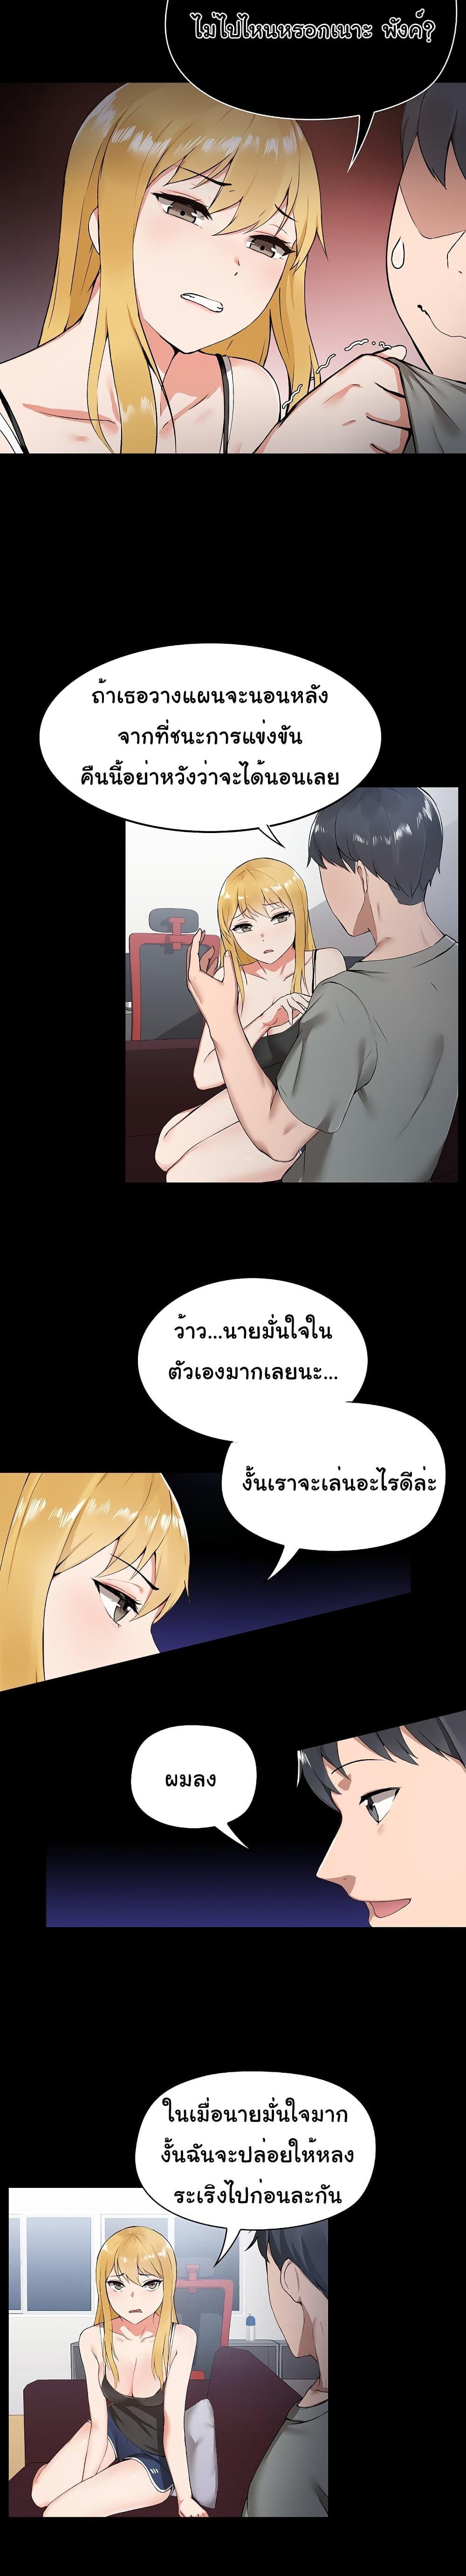 All About That Game Life 1 ภาพ 12